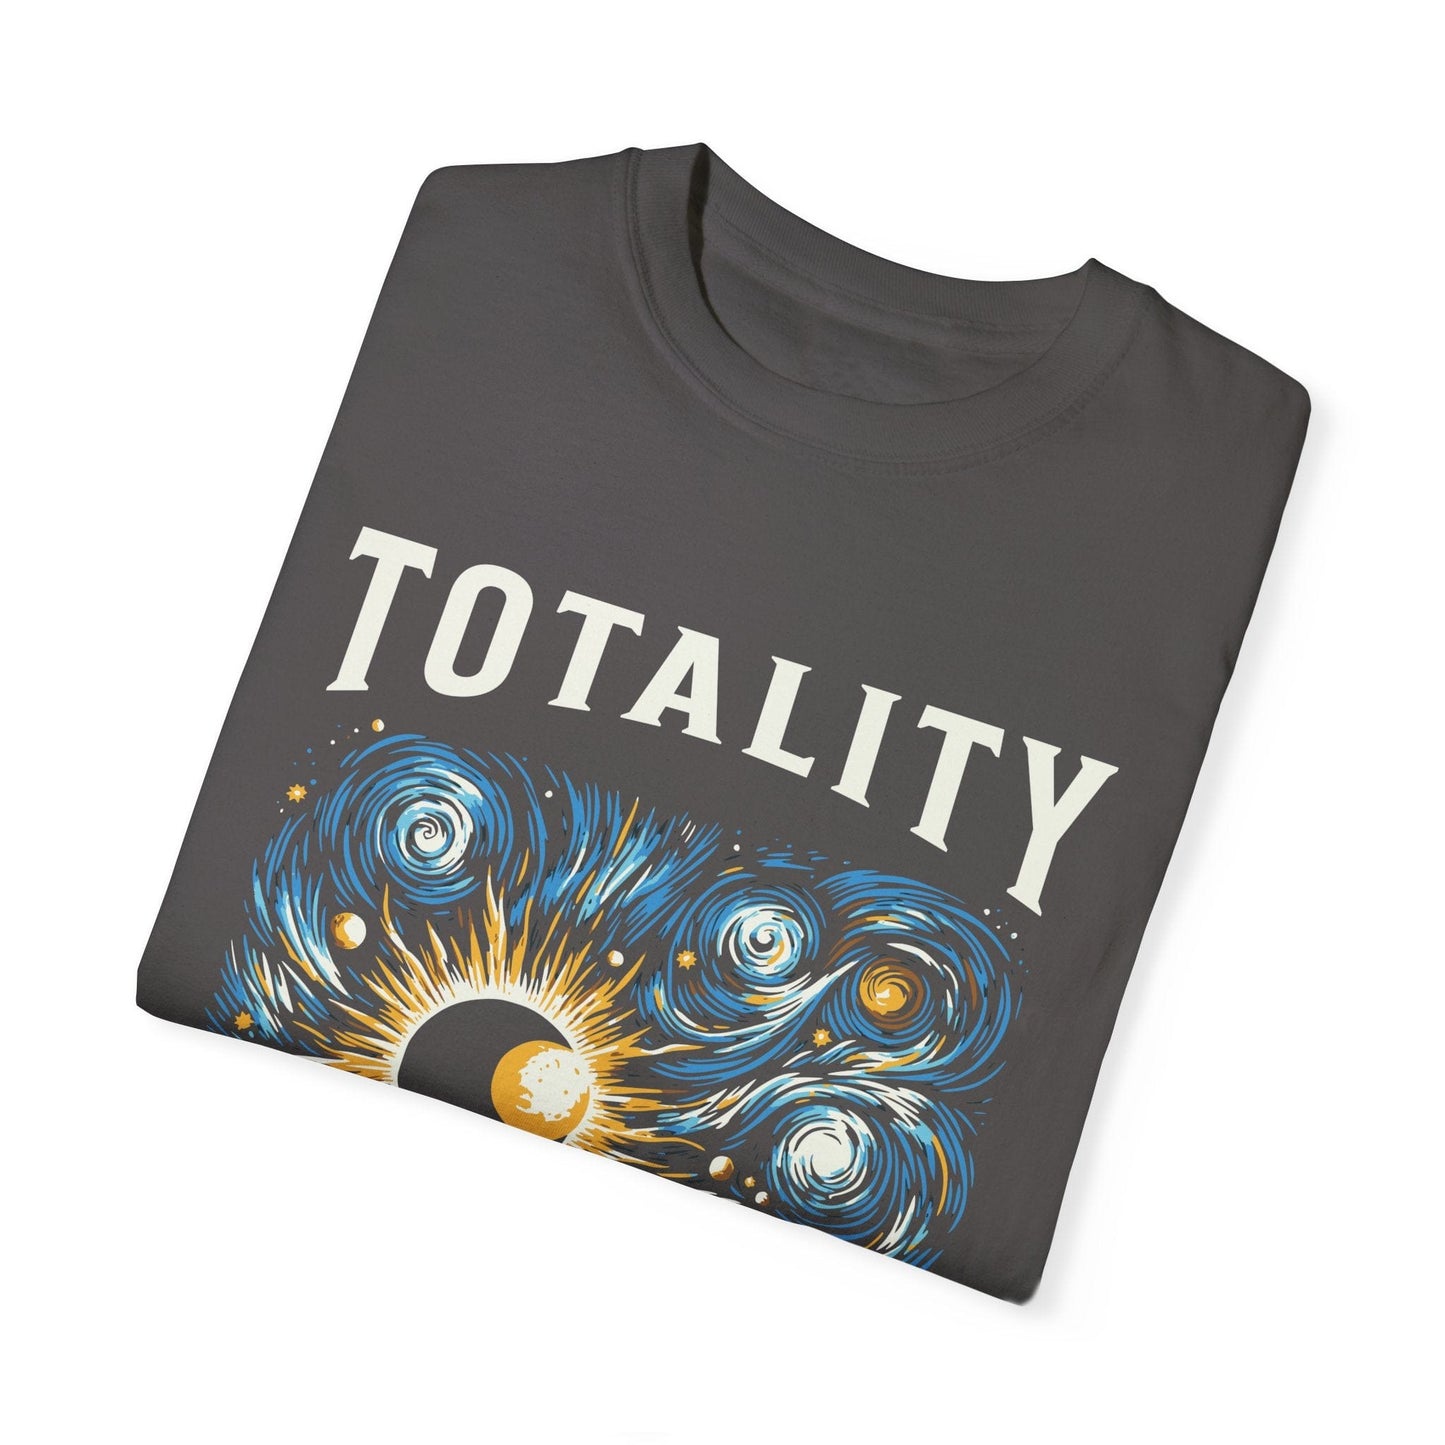 Totality Solar Eclipse 4.08.24 Starry Night Painting Shirt Adult S-4XL - Black/Graphite